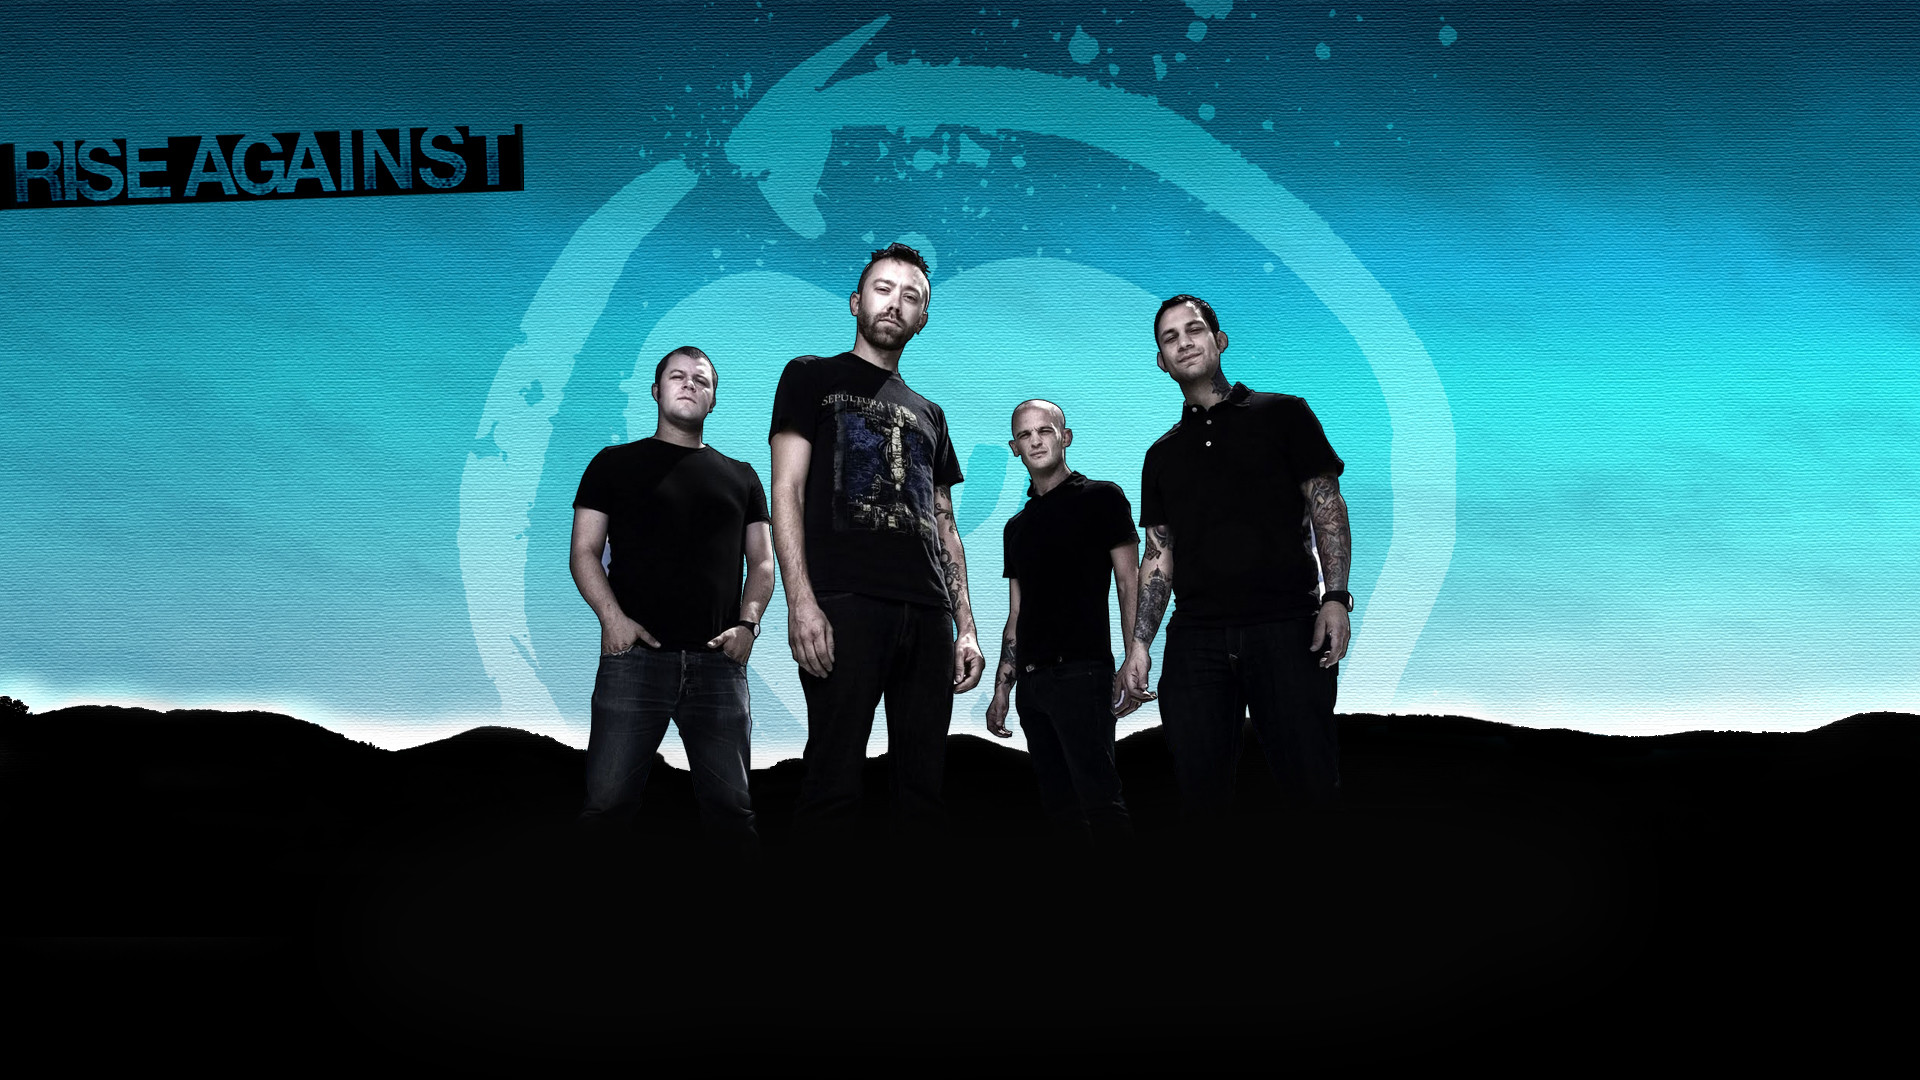 1920x1080 ... Rise Against - Sky Wallpaper lite by onfinay